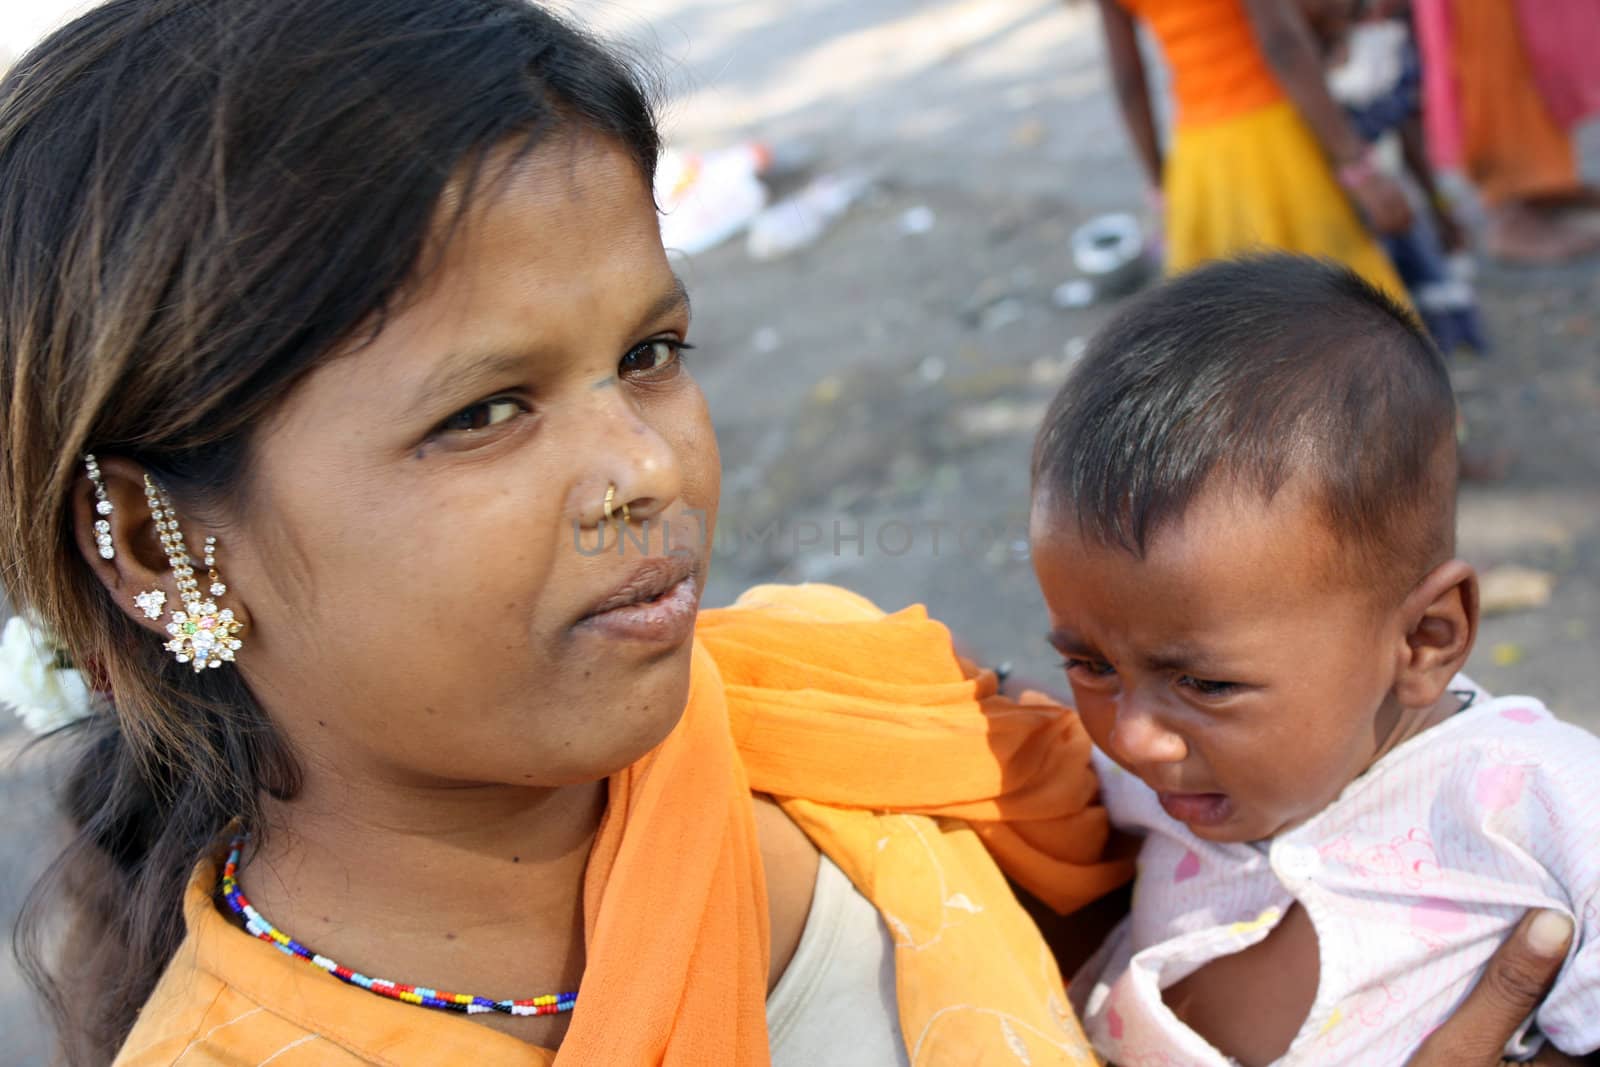 Teenage marraiges are not legal and is one of the important crime happening since many years in India. Seen here is a young mother with a child. Focus on the eye of the mother.